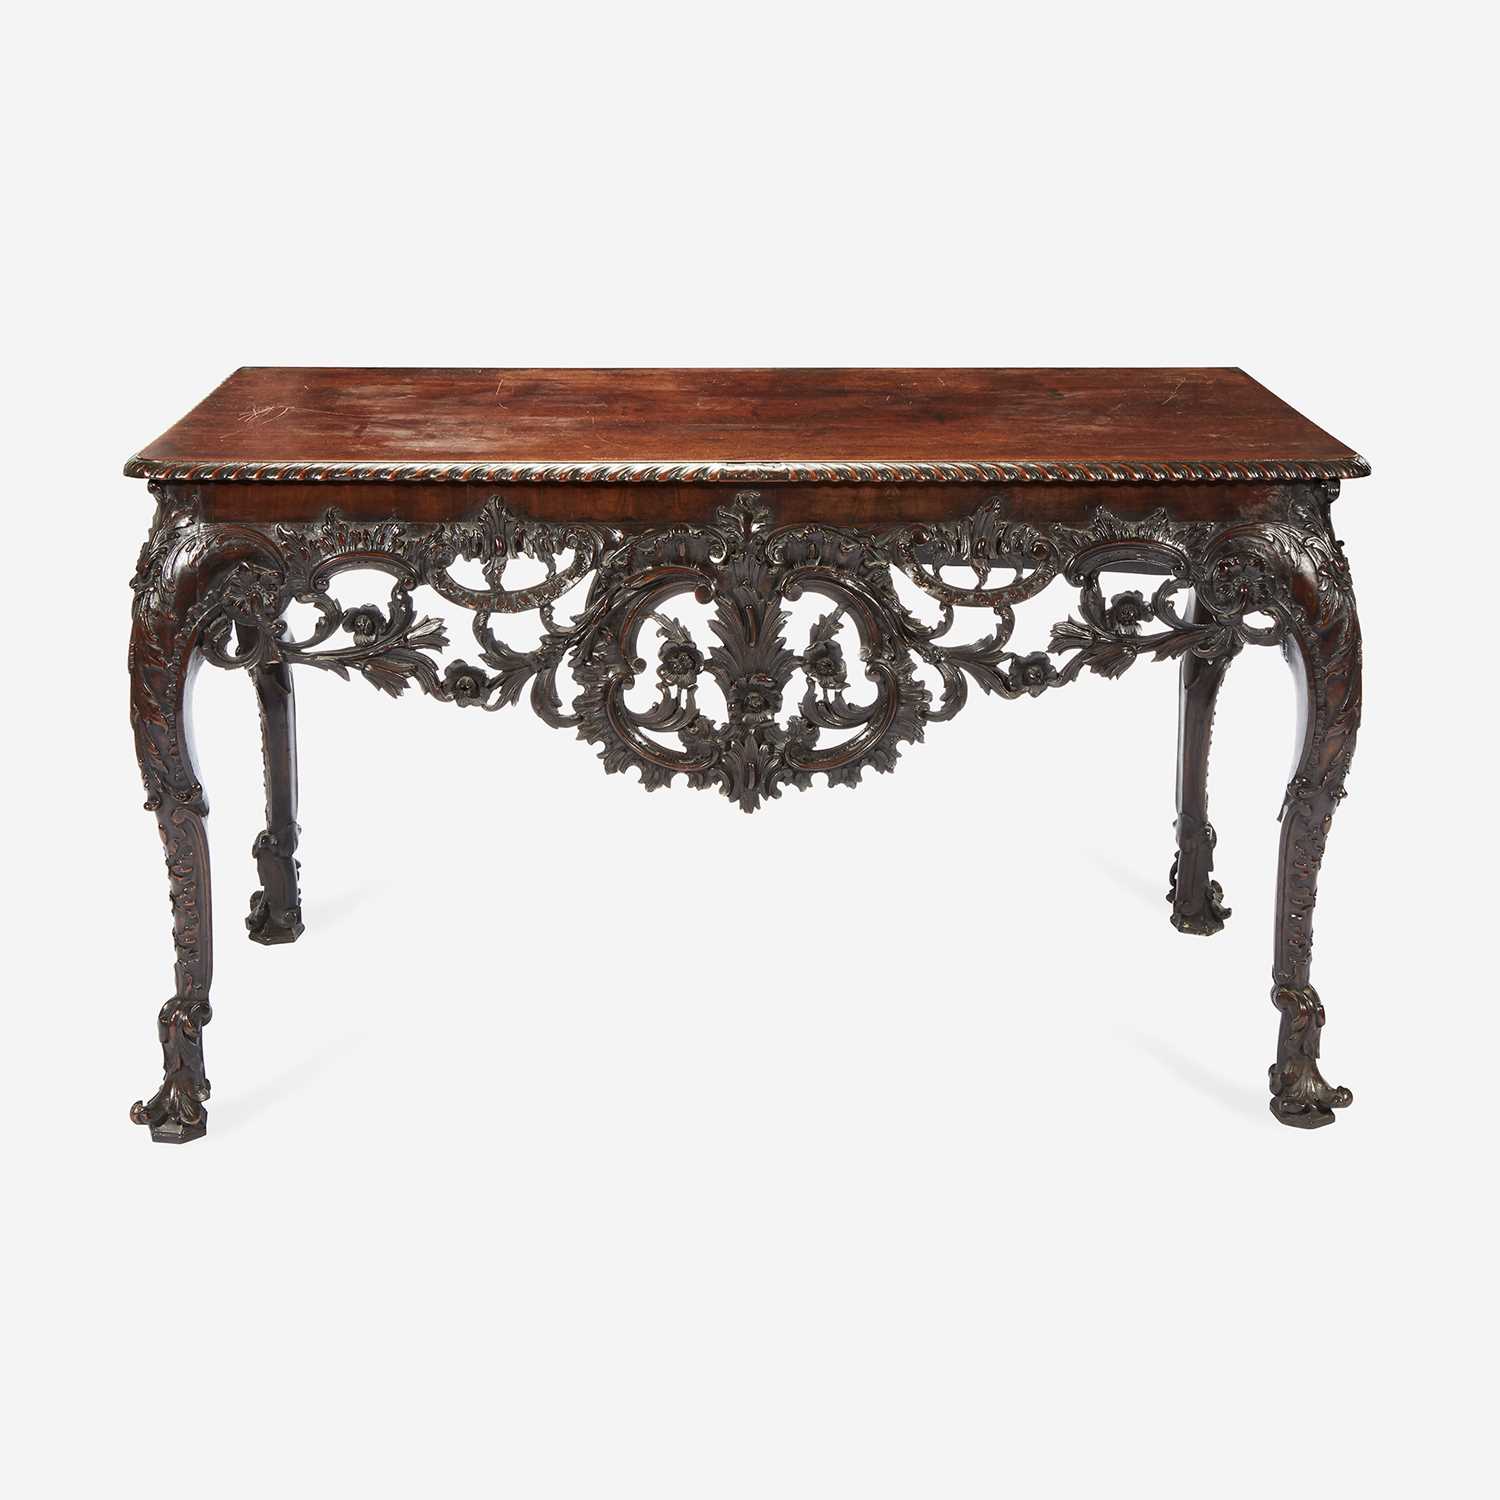 A George II Carved Mahogany Console Table